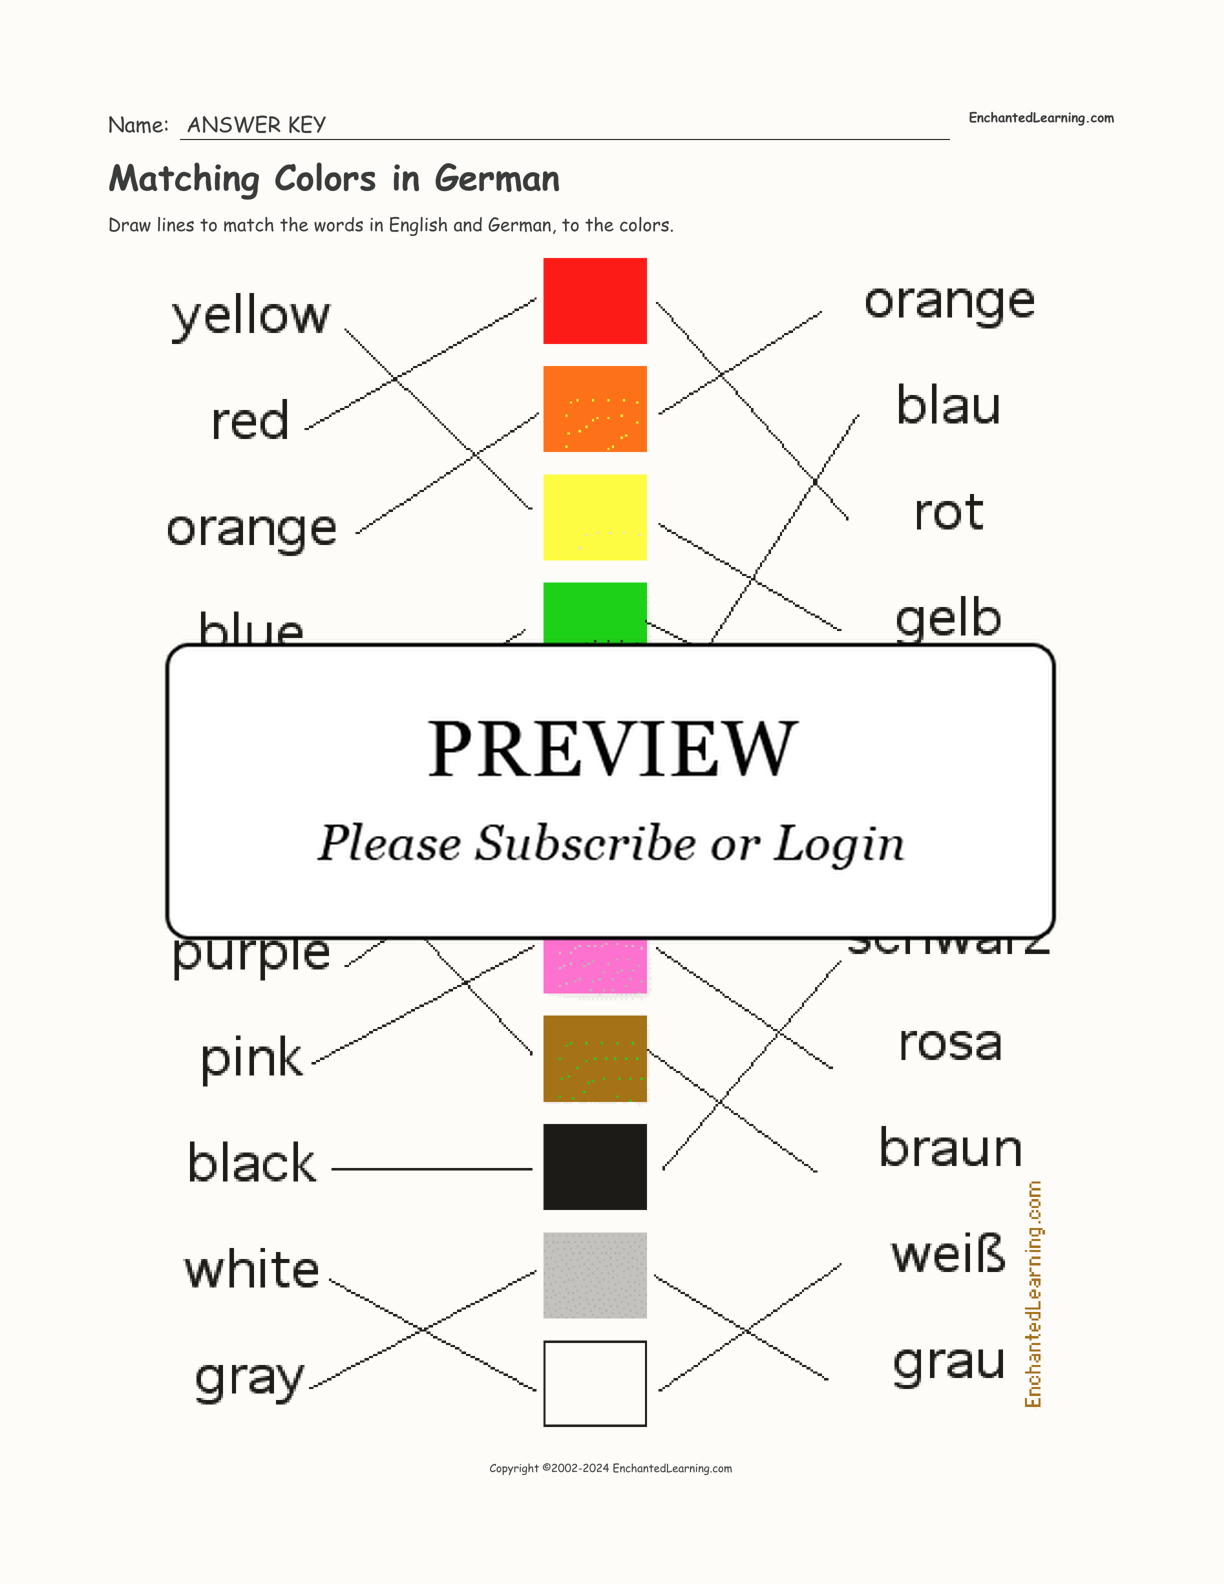 Matching Colors in German interactive worksheet page 2